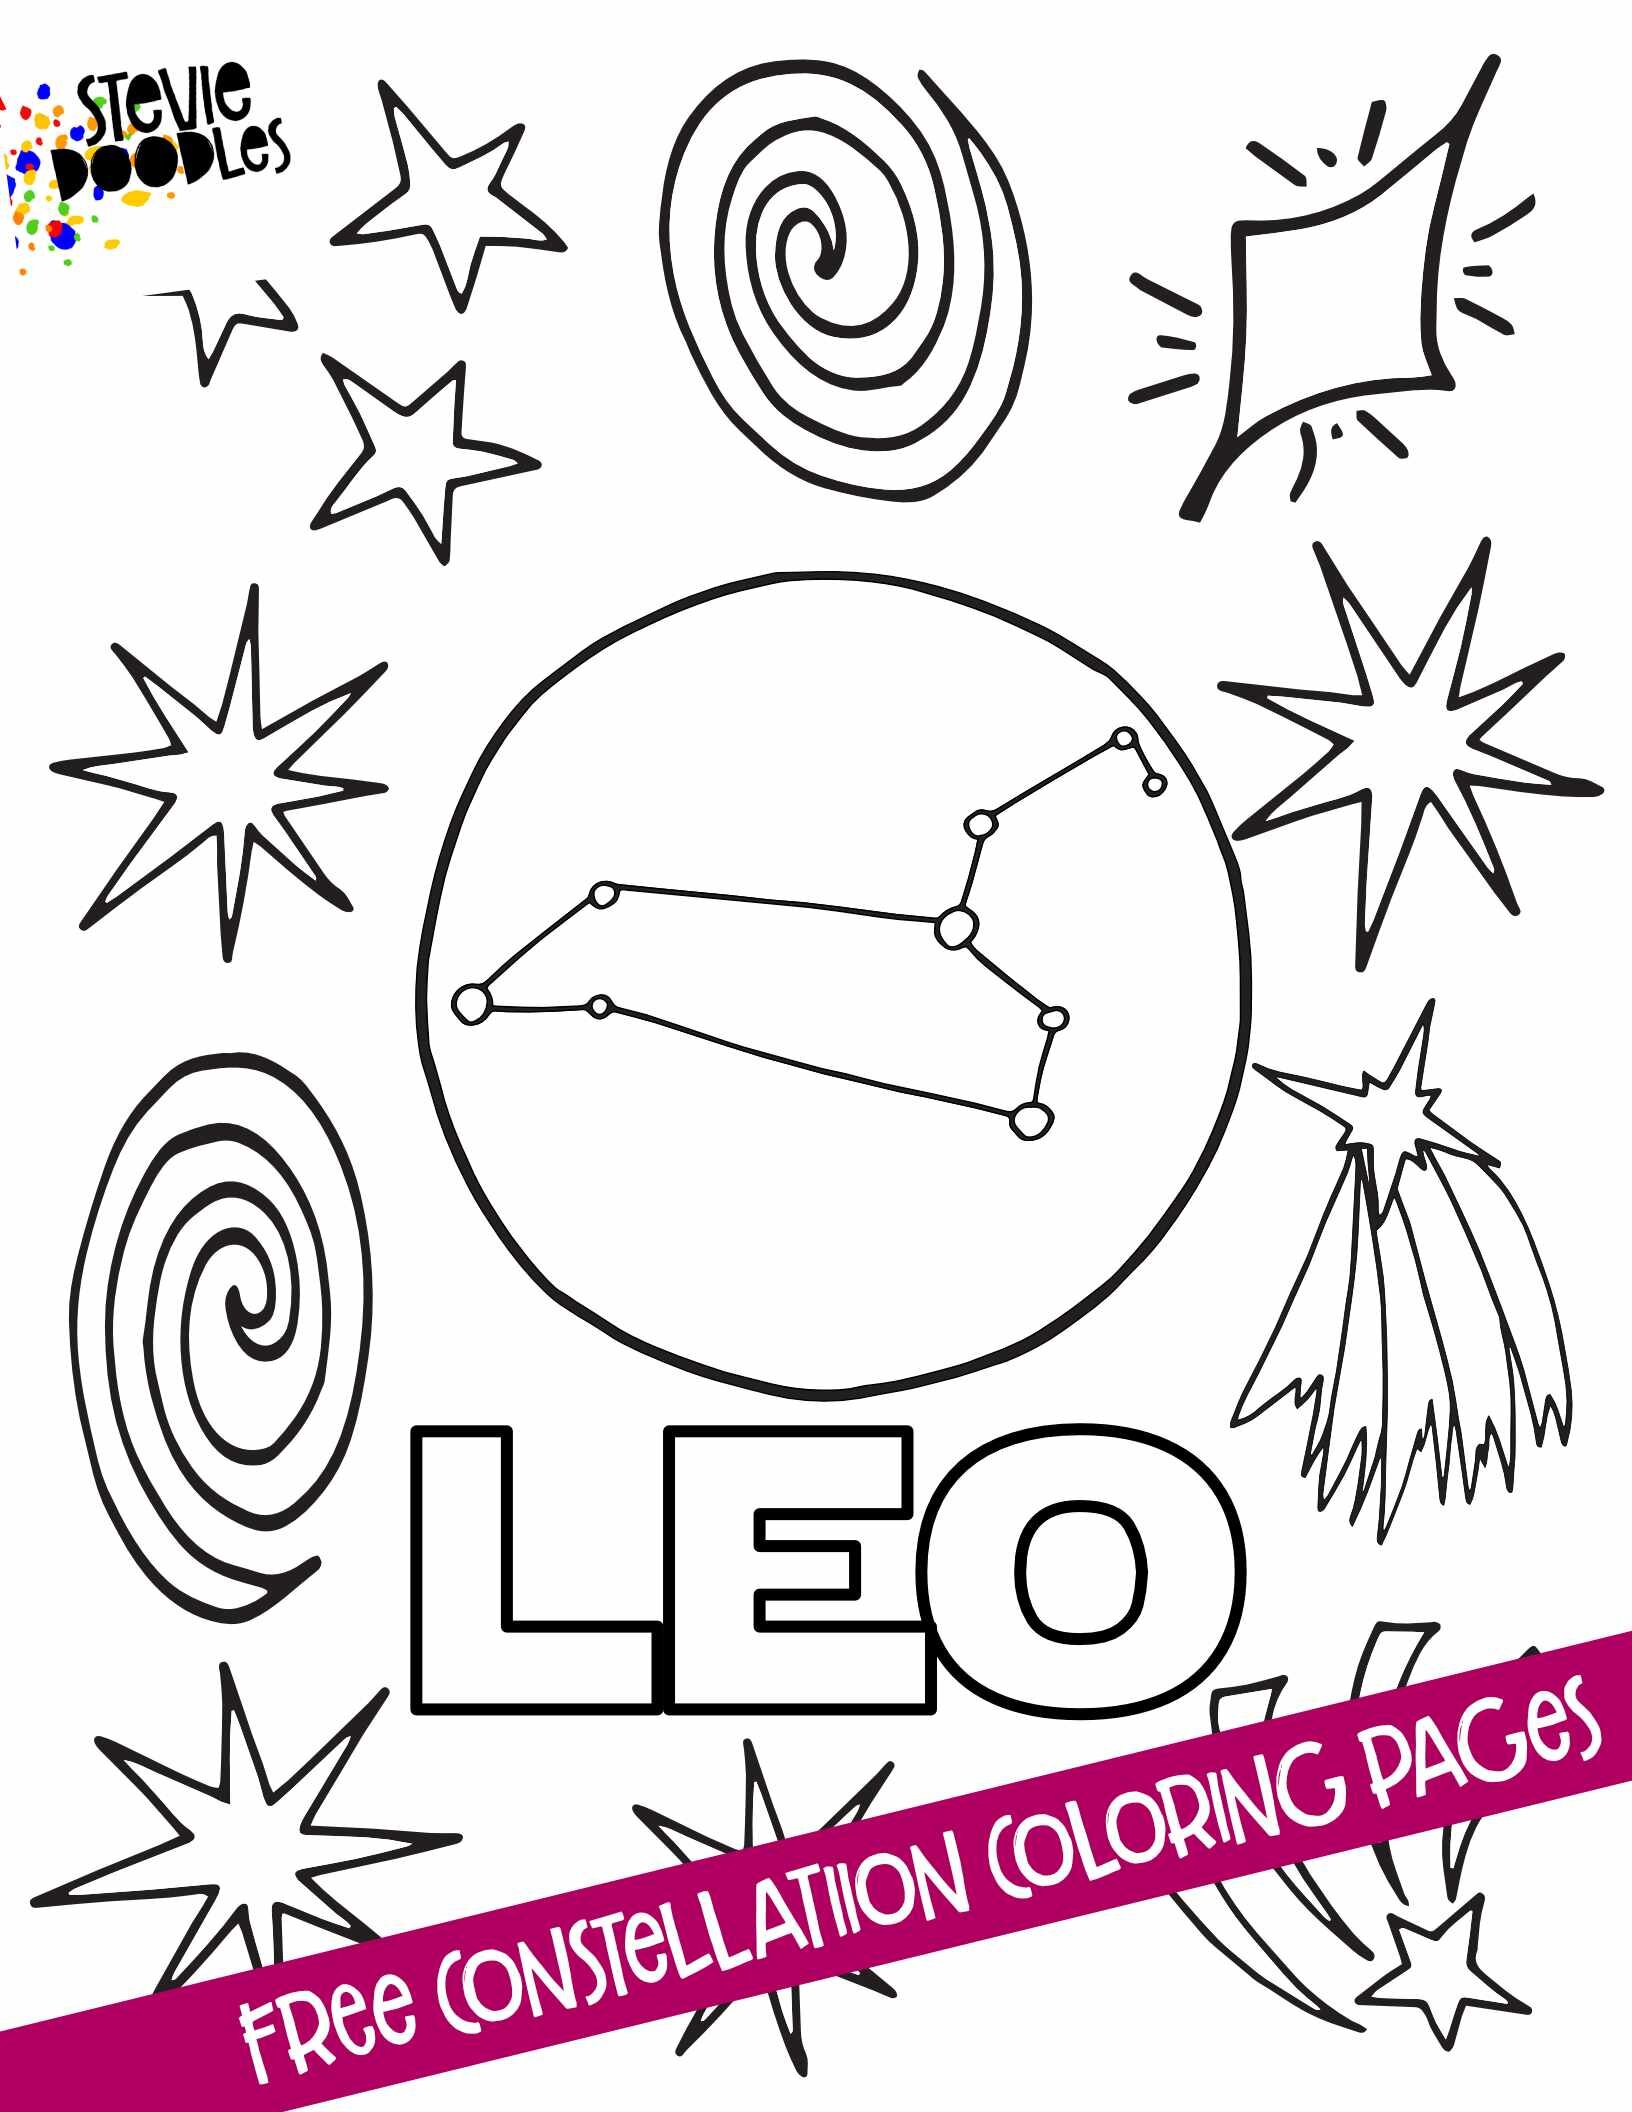 LEO - 12 Free Constellation Coloring Pages - Over 1000 Free Coloring Pages CLICK HERE TO PRINT THE PAGE ABOVE